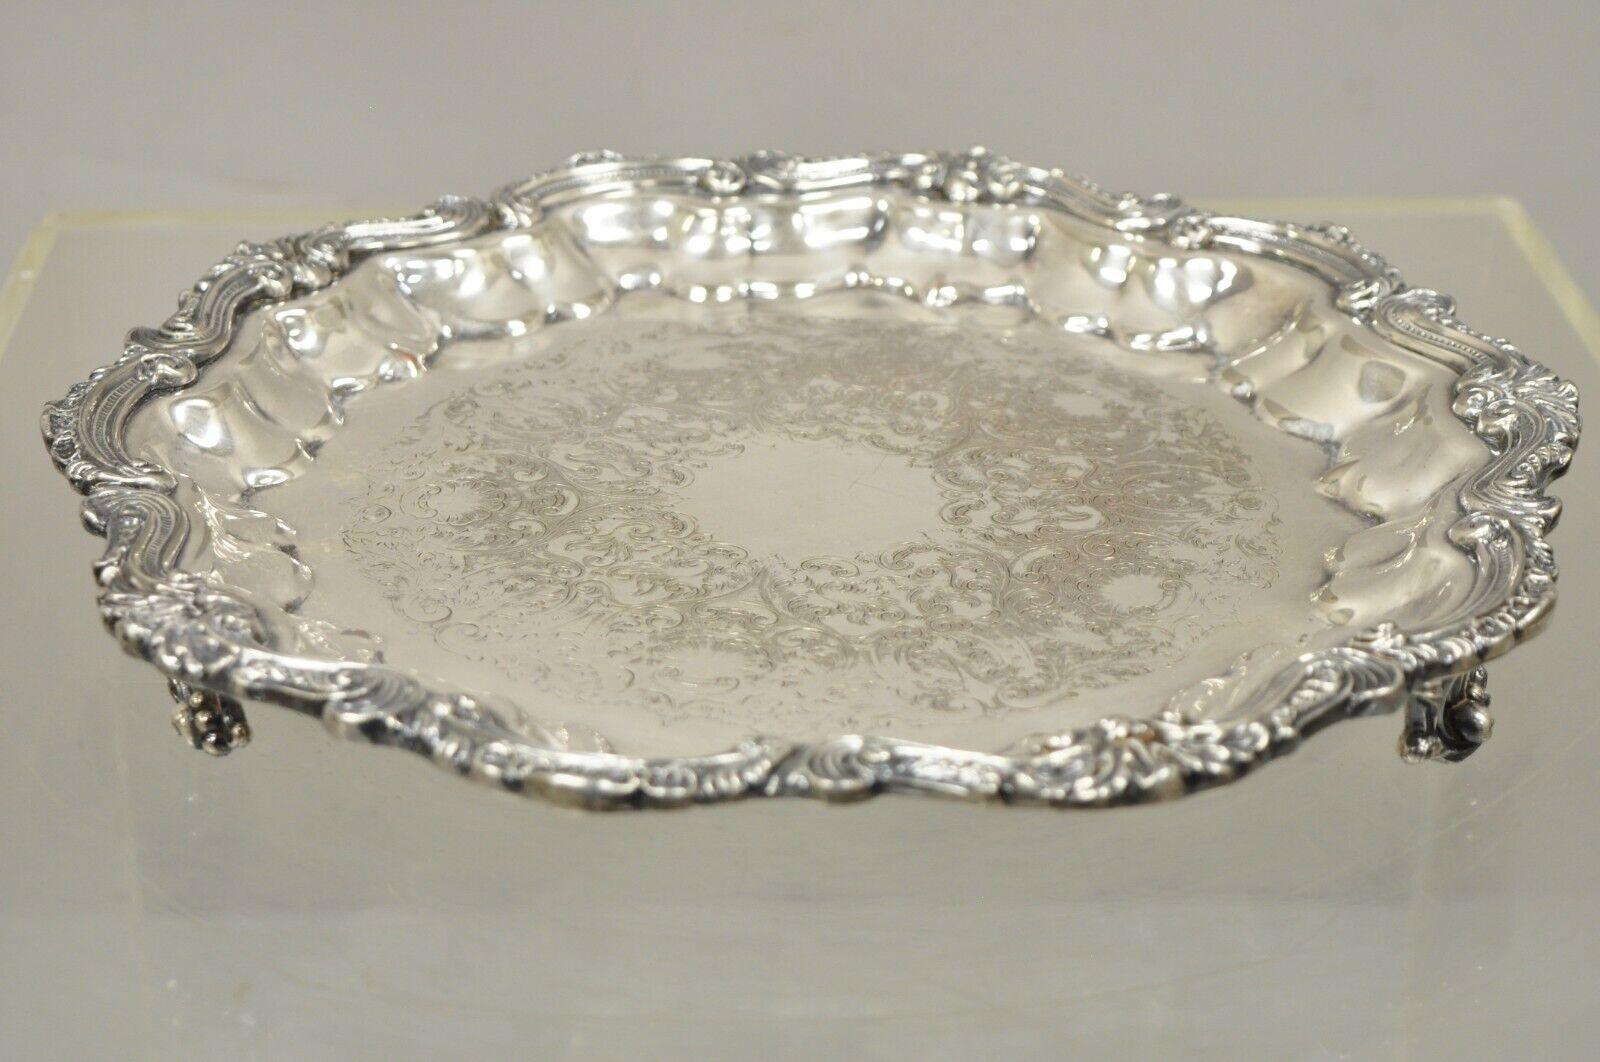 English Silver Mfg Scalloped Edge Regency Style Silver Plated Platter Tray 4